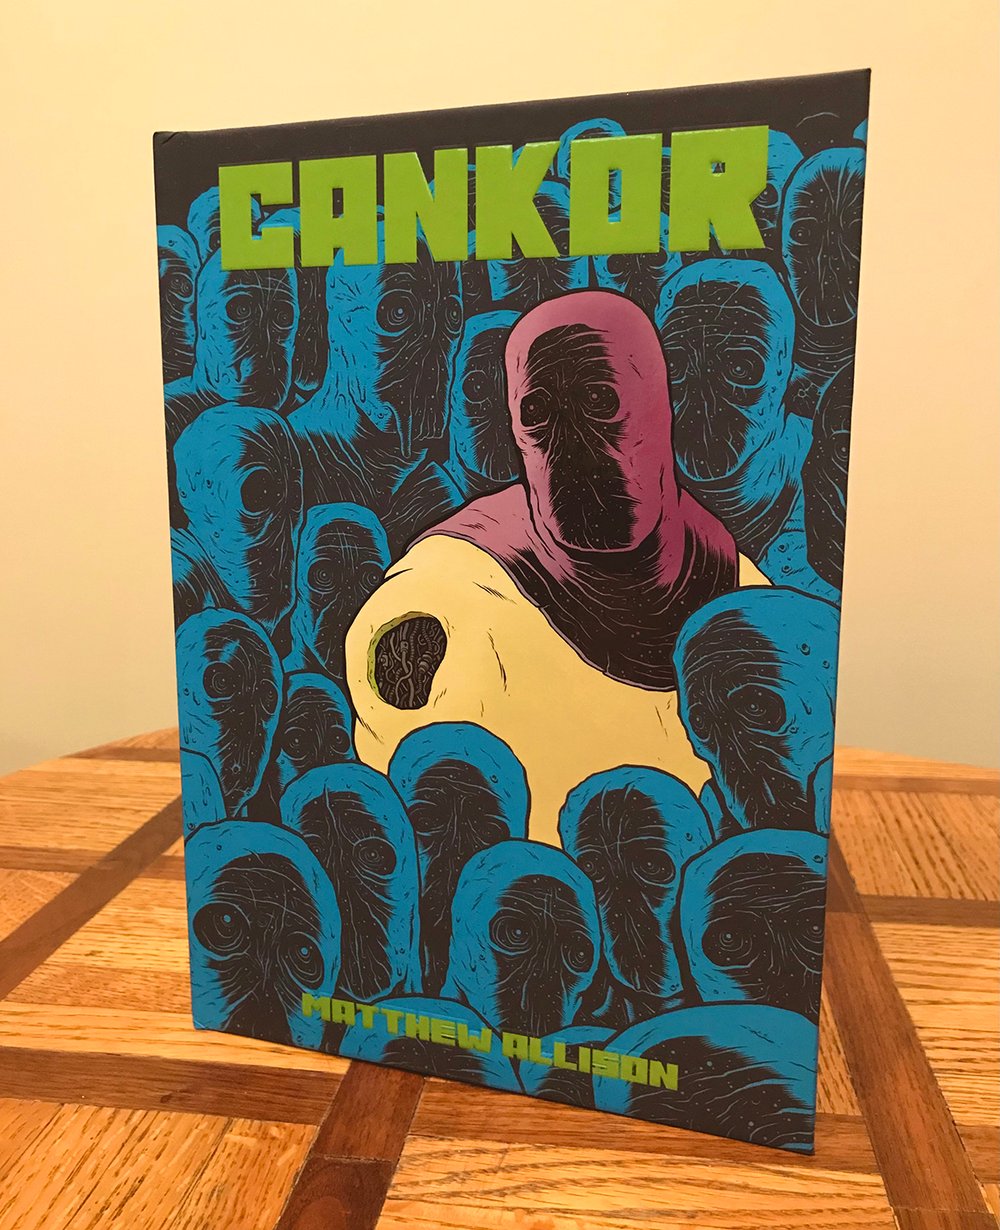 CANKOR: Collected Edition w/hand drawn portrait